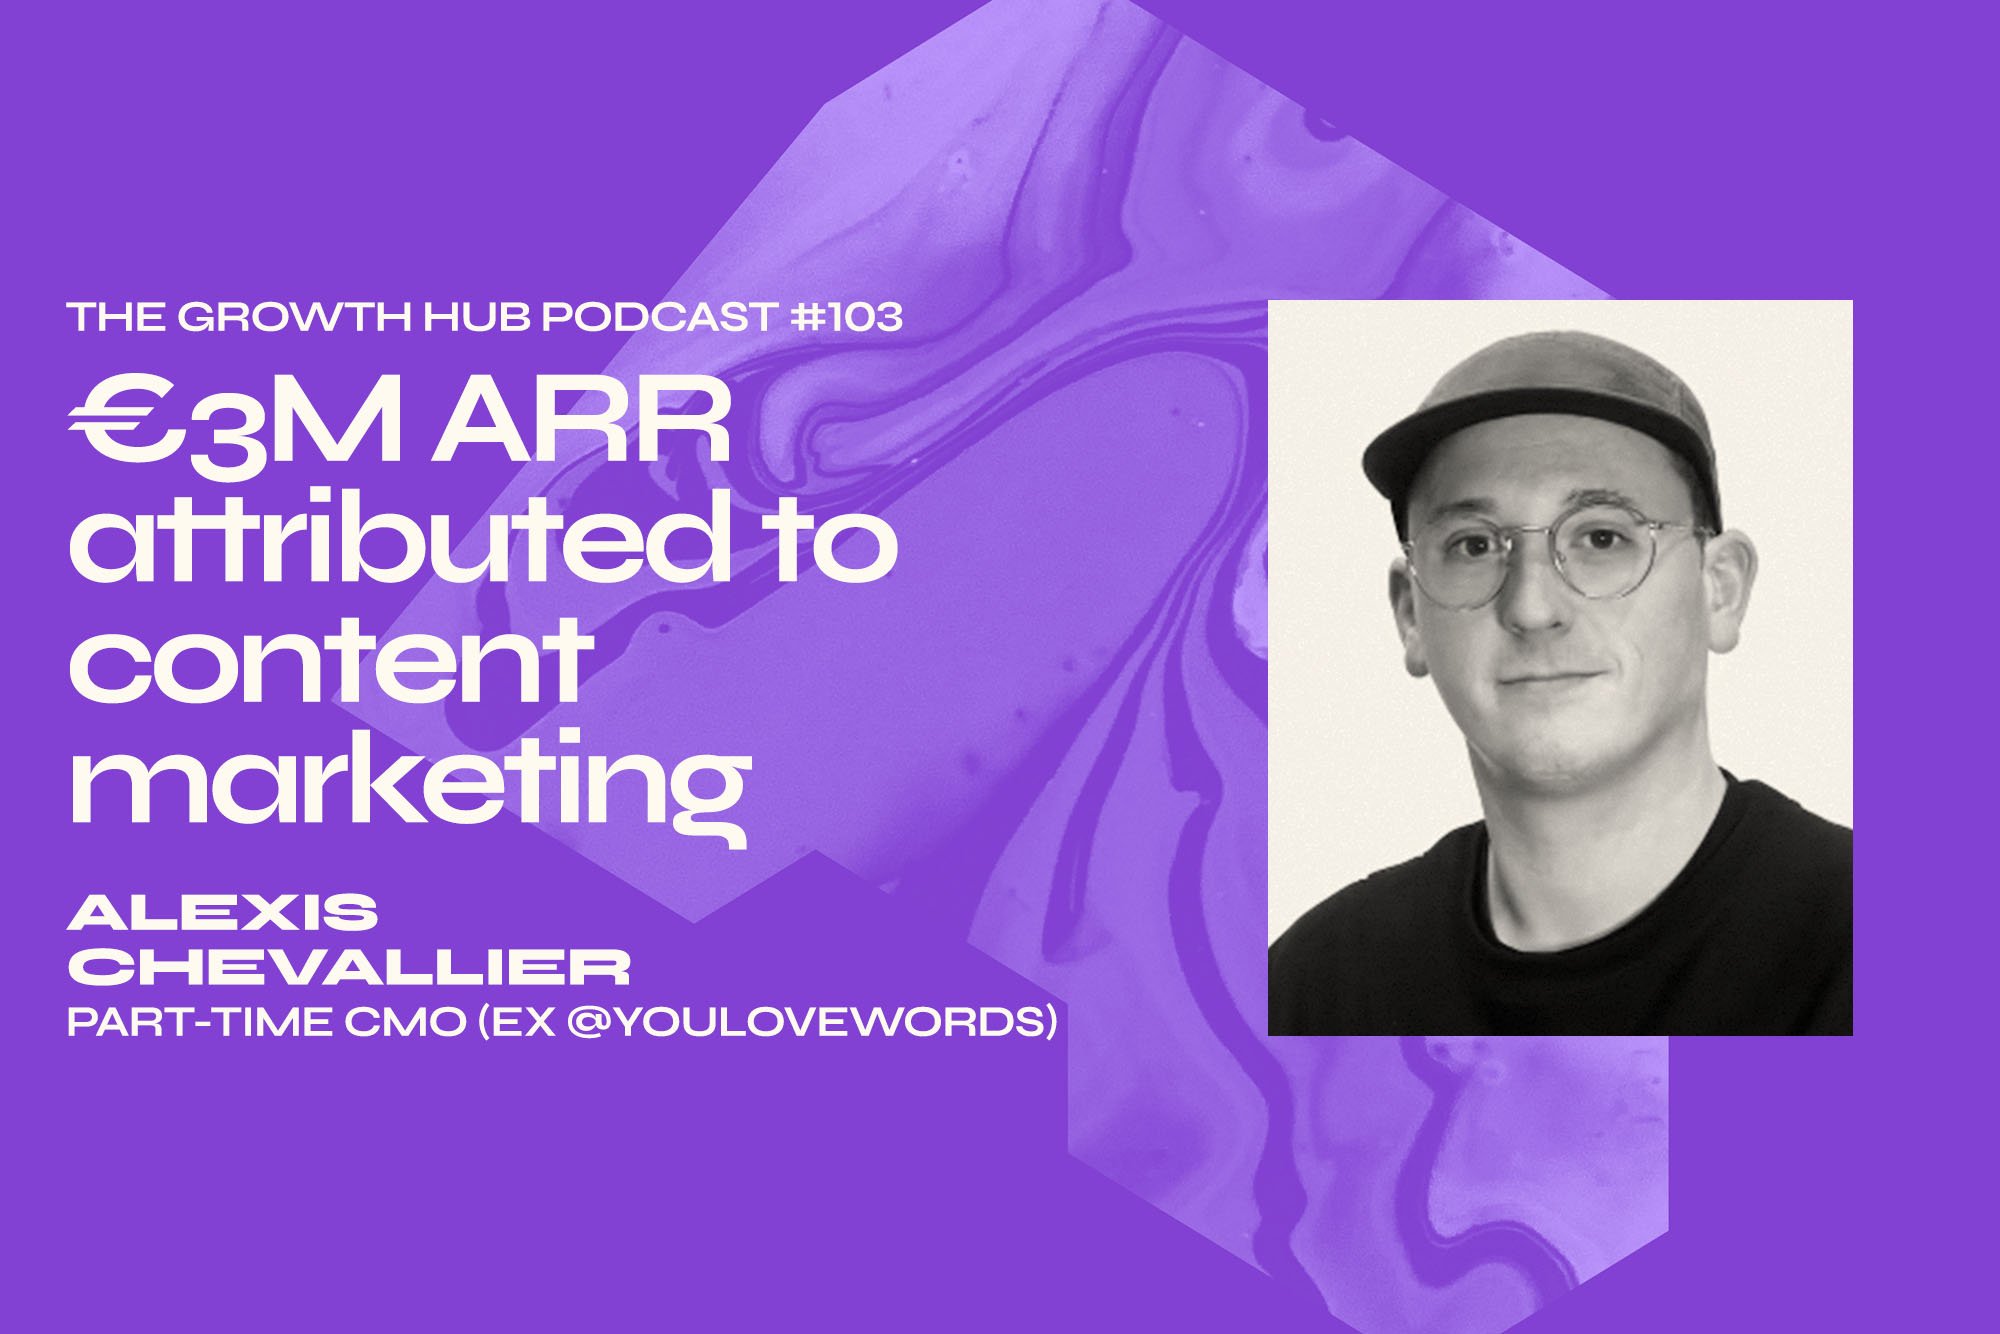 How to Achieve €3M ARR Attributed to Content Marketing